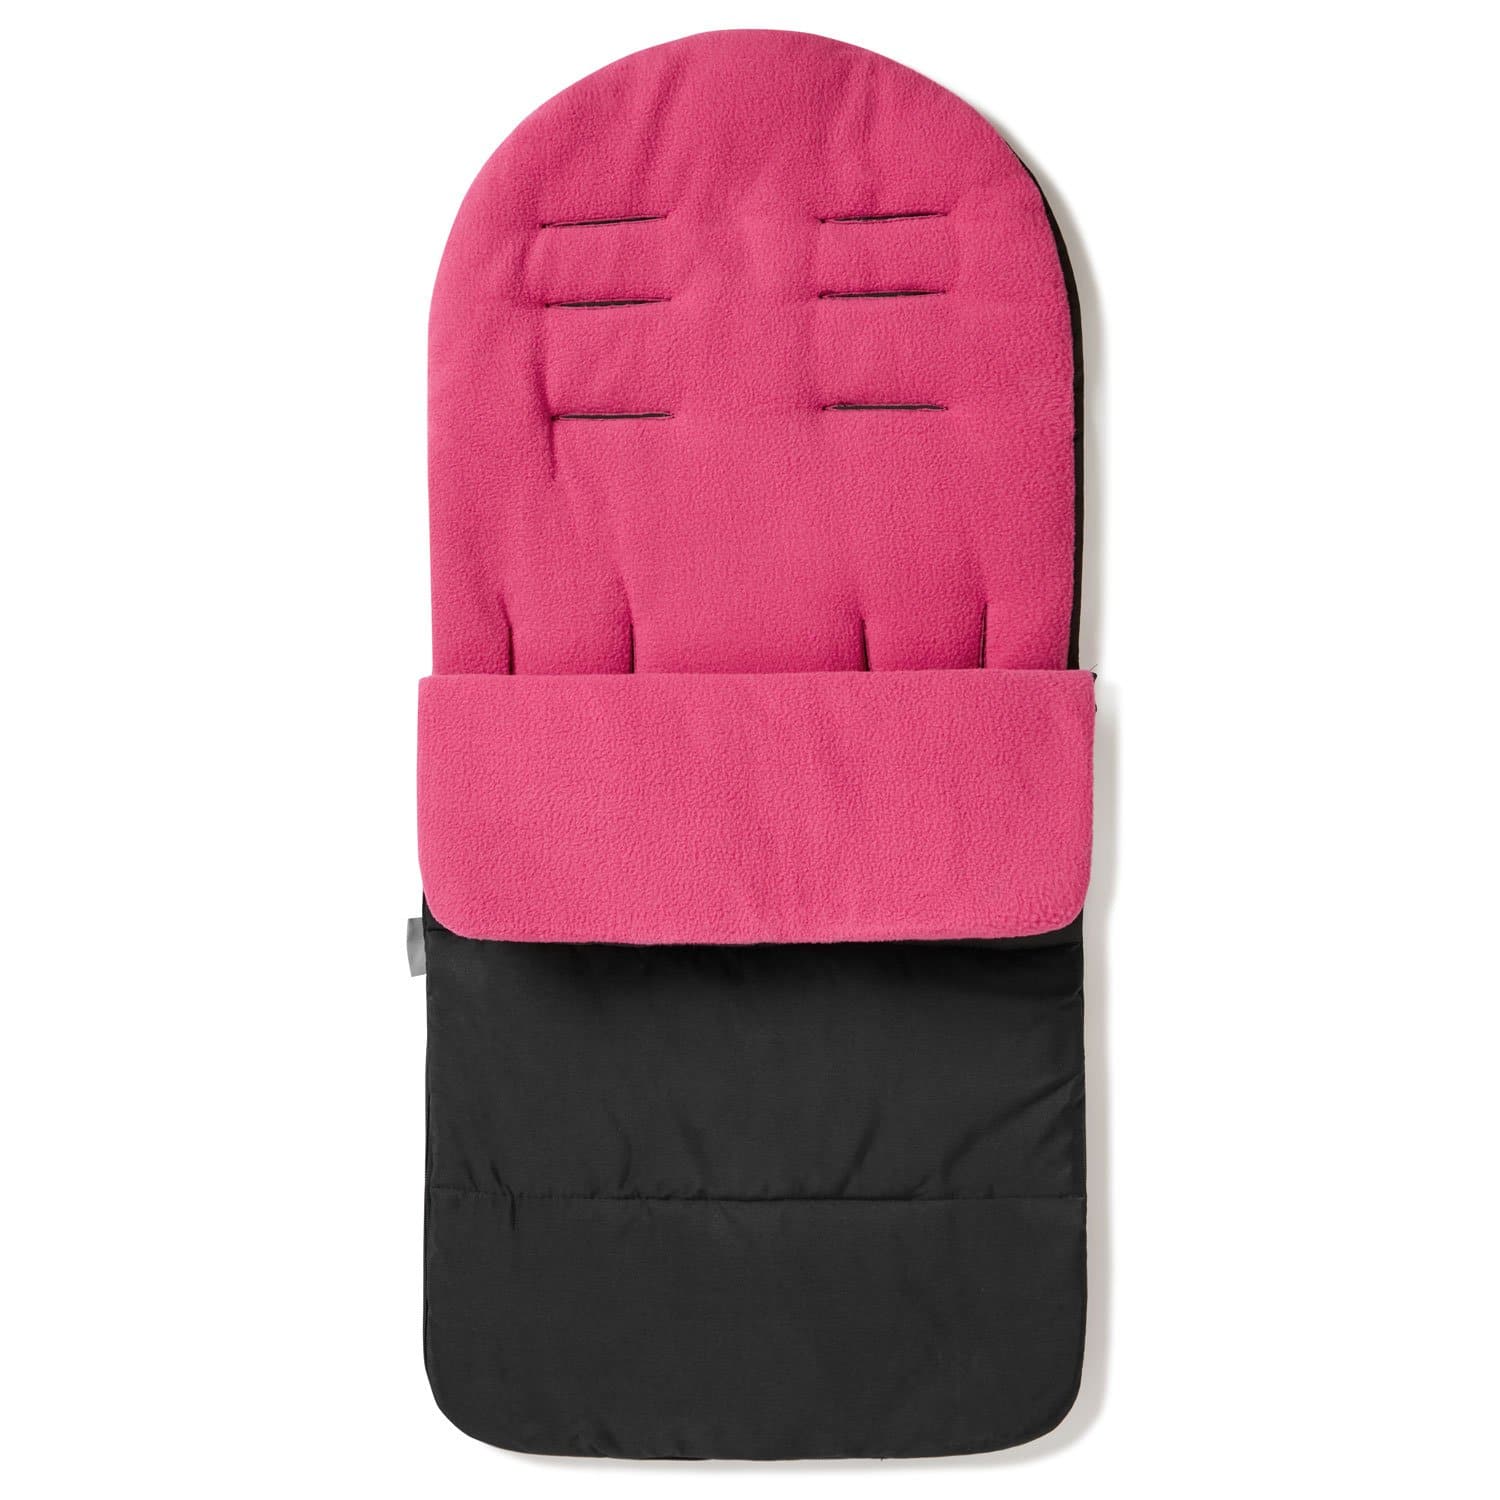 Premium Footmuff / Cosy Toes Compatible with Zooper - Pink Rose / Fits All Models | For Your Little One